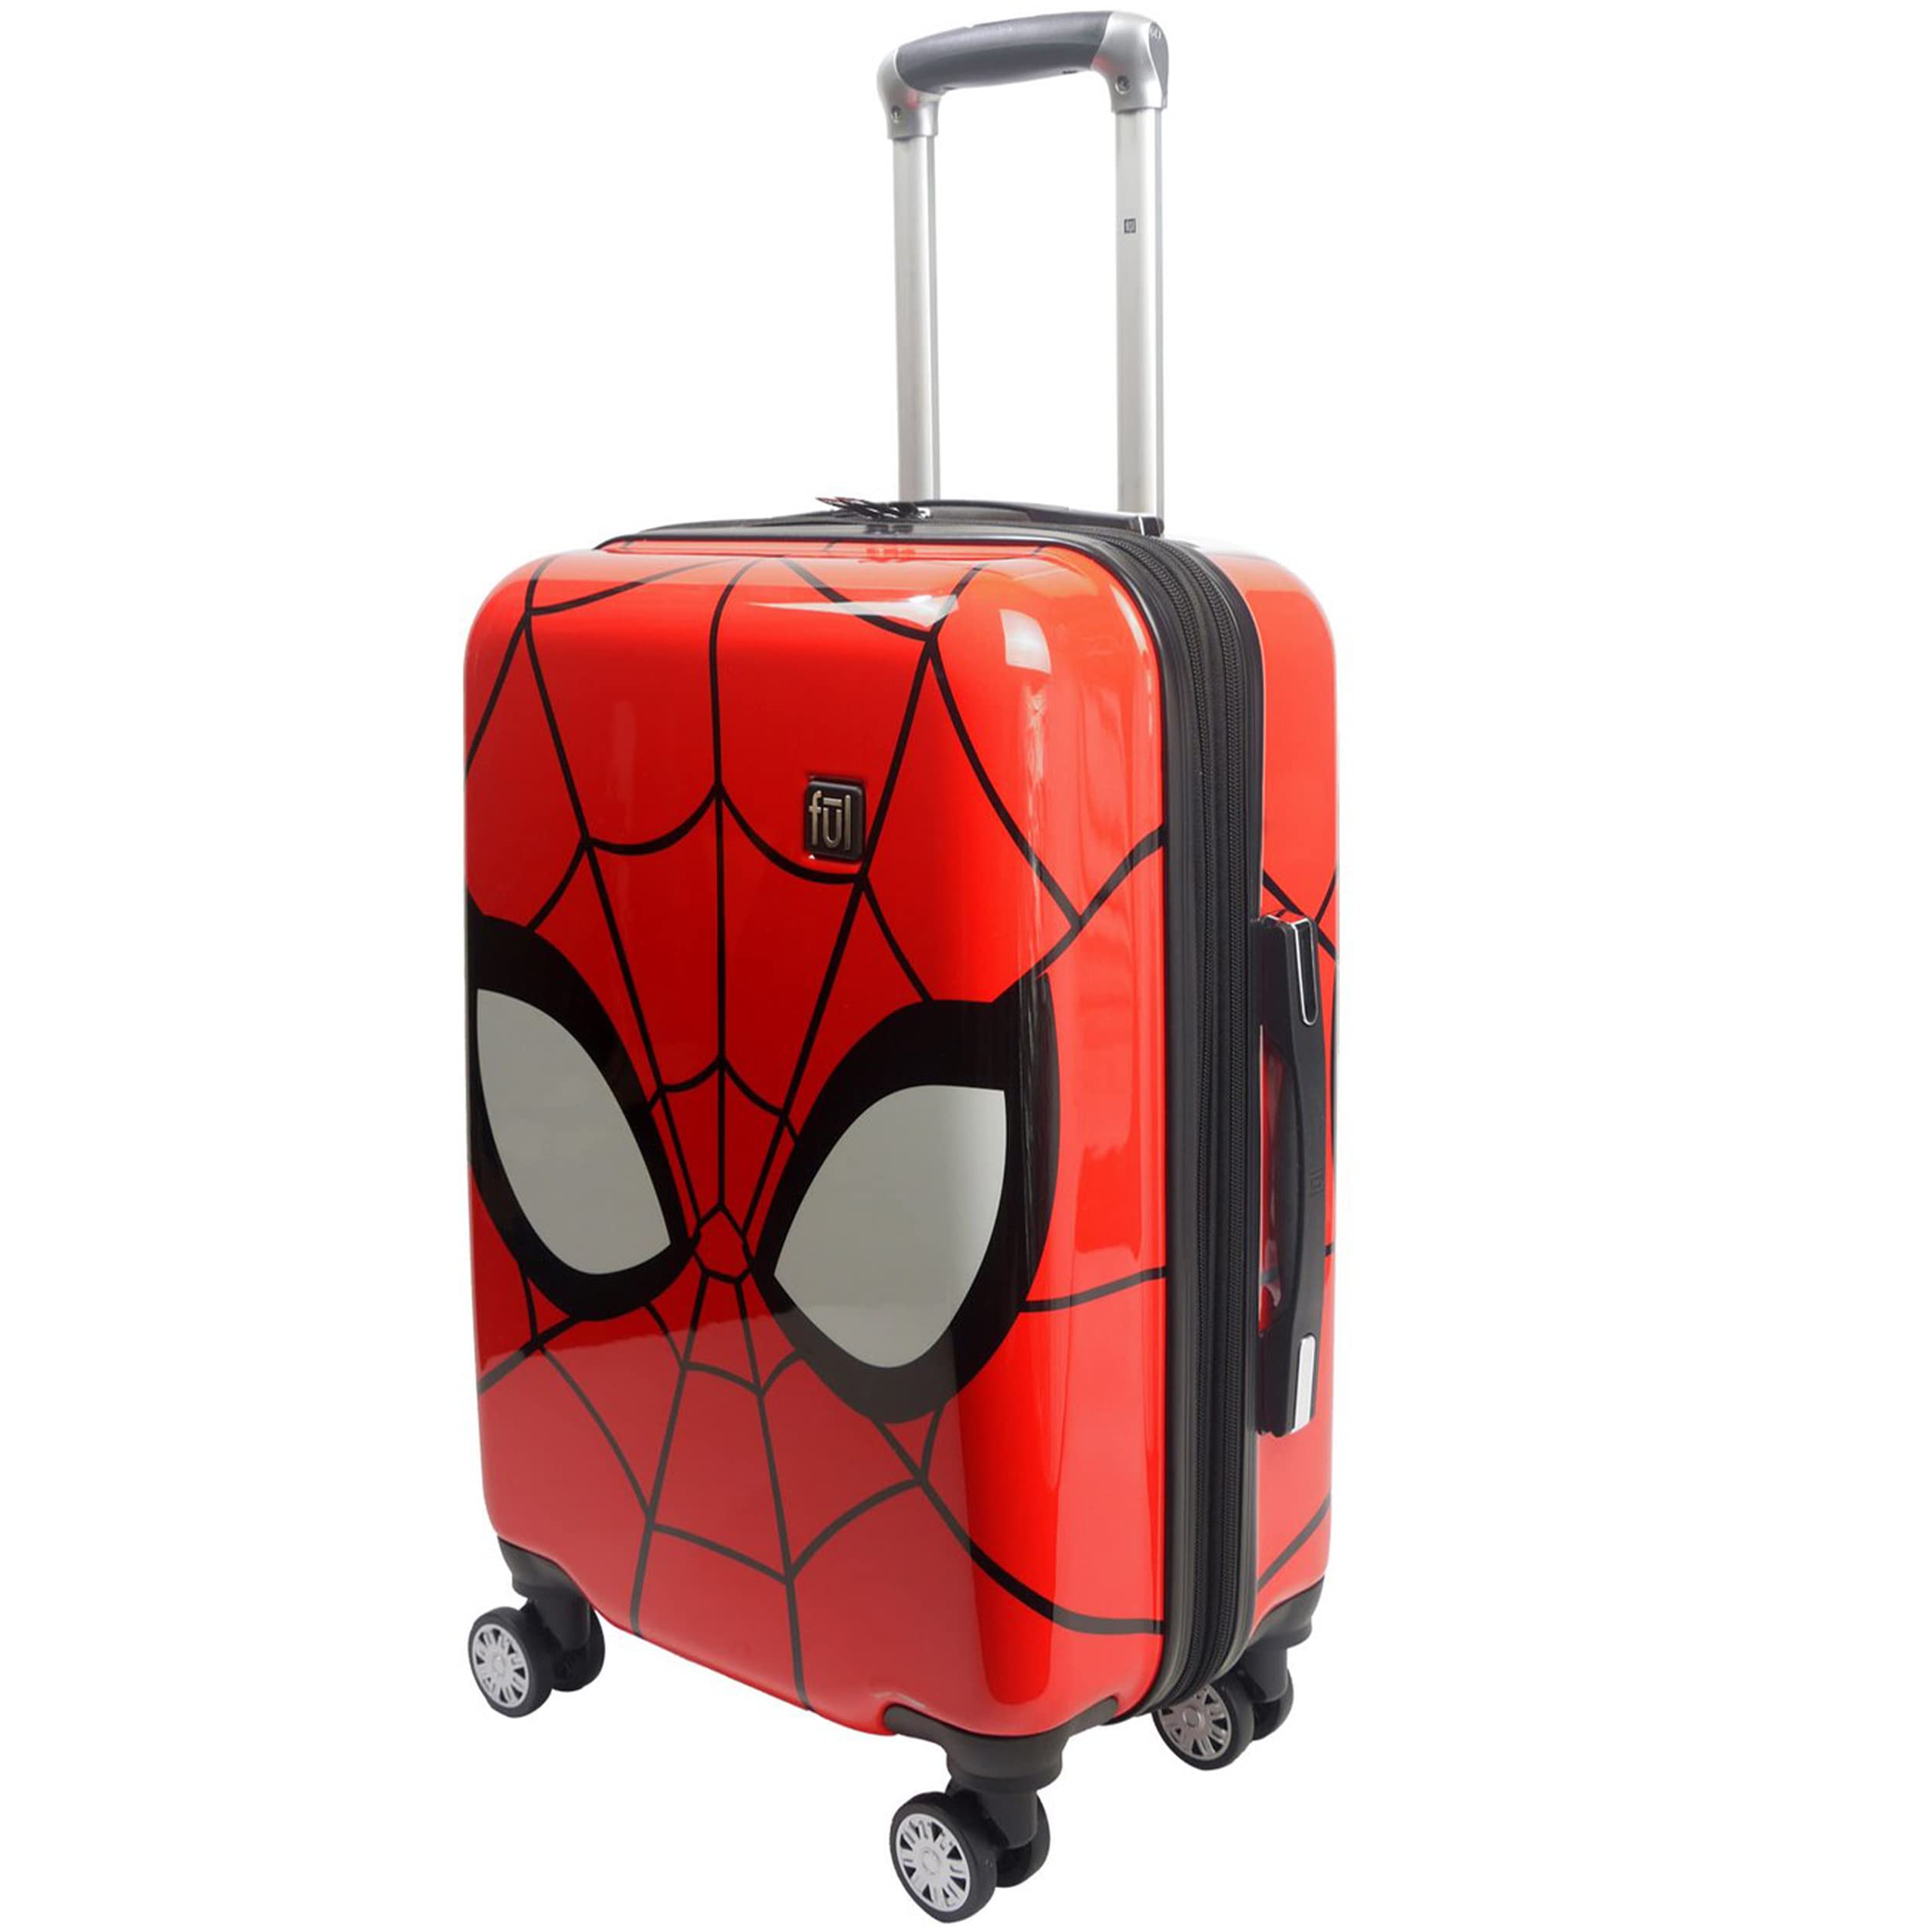 FUL Marvel Spider-Man 22 Inch Rolling Luggage, Mask Design Hardshell carry On Suitcase with Wheels, Red